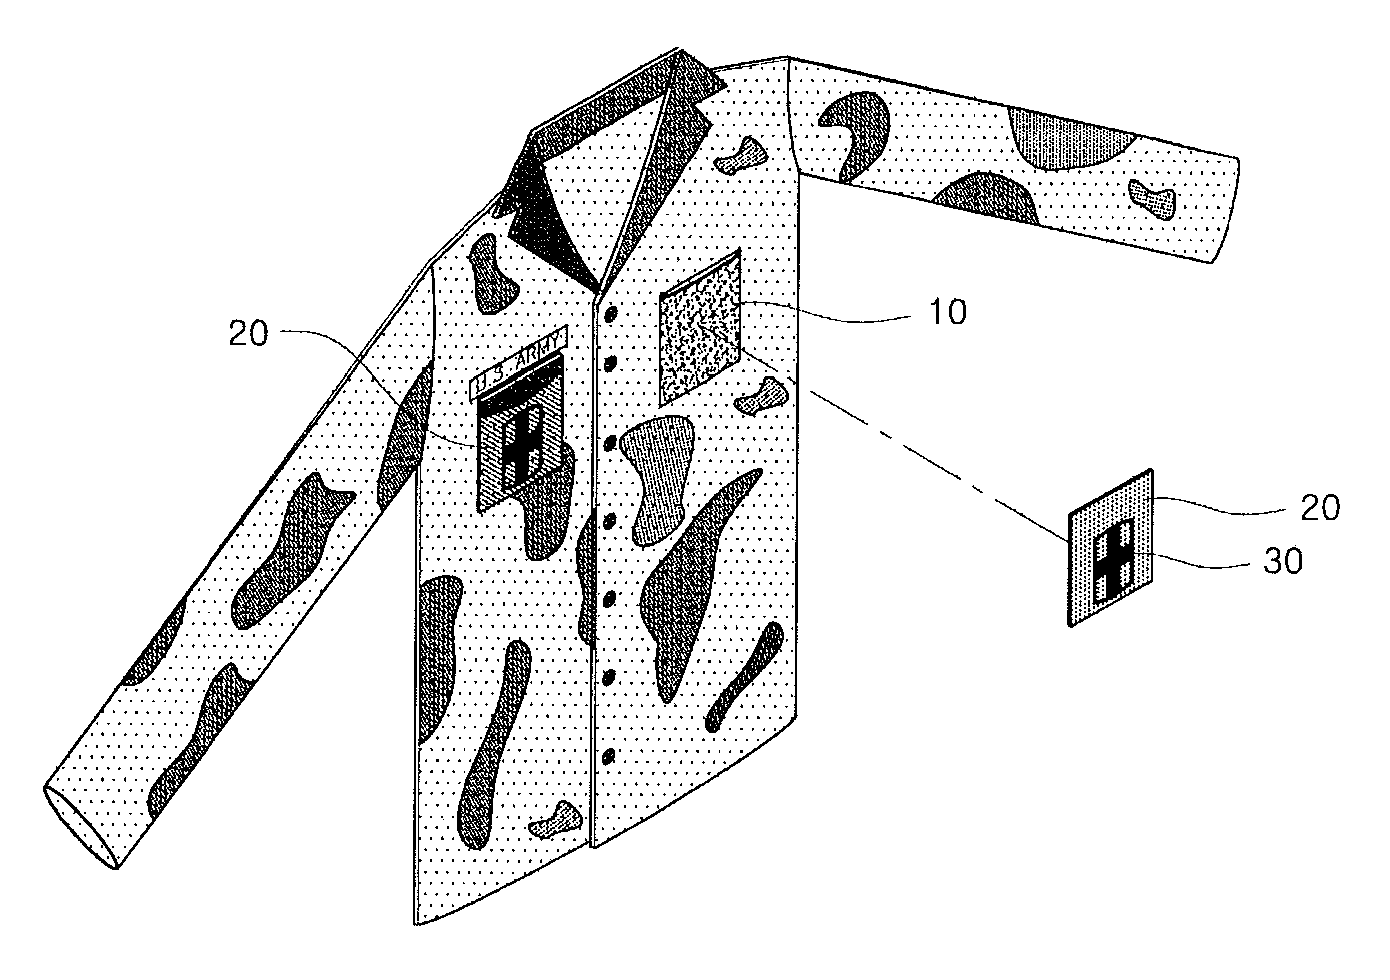 Apparatus for attaching extraneous item to military uniform